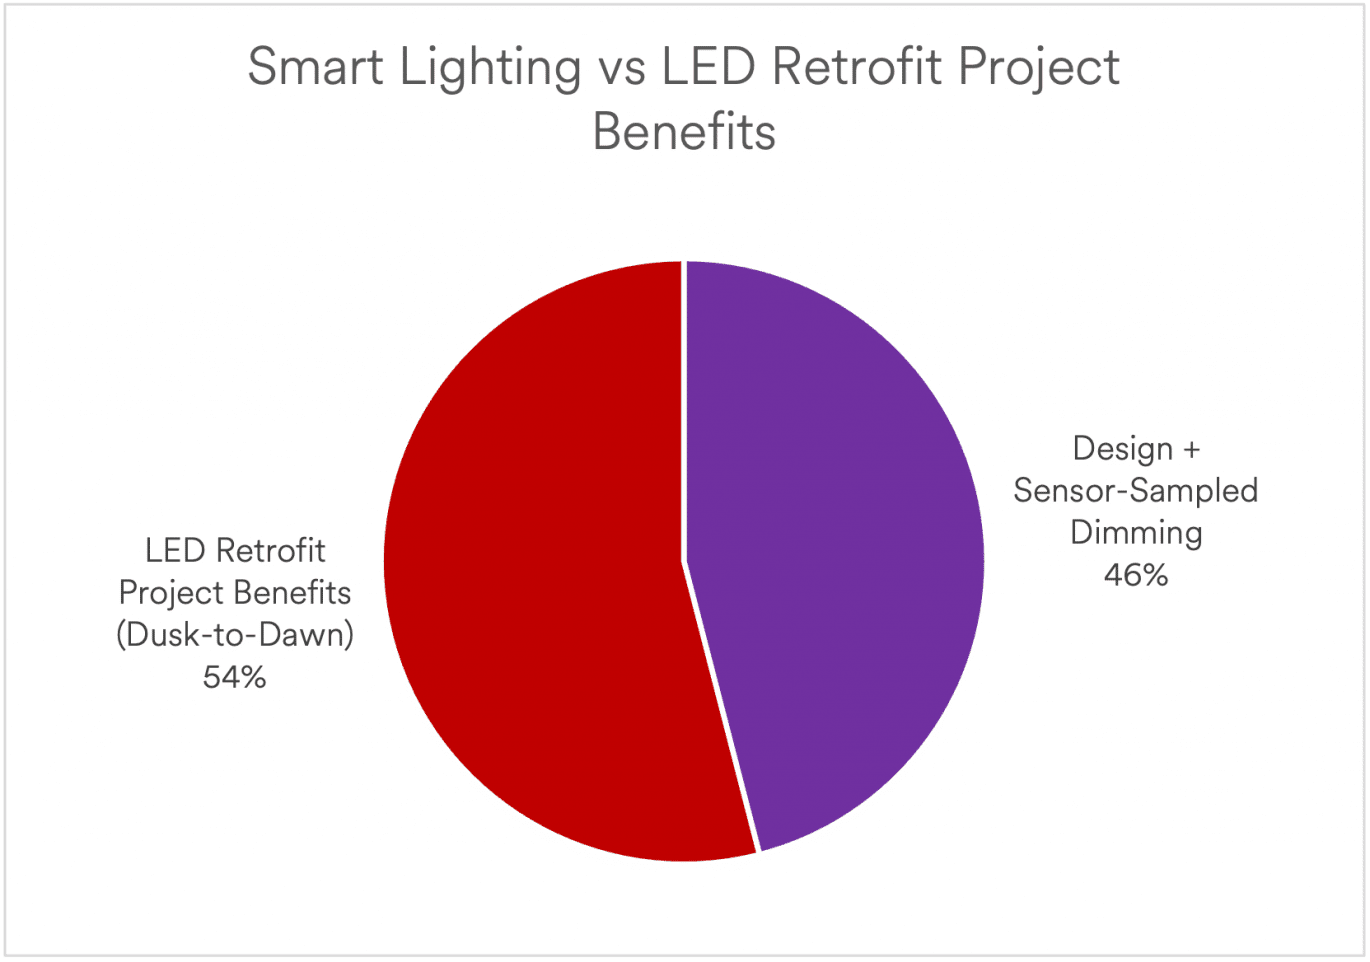 A pie chart comparing the benefits of an LED retrofit project with a Smart Lighting project using adaptive dimming control.